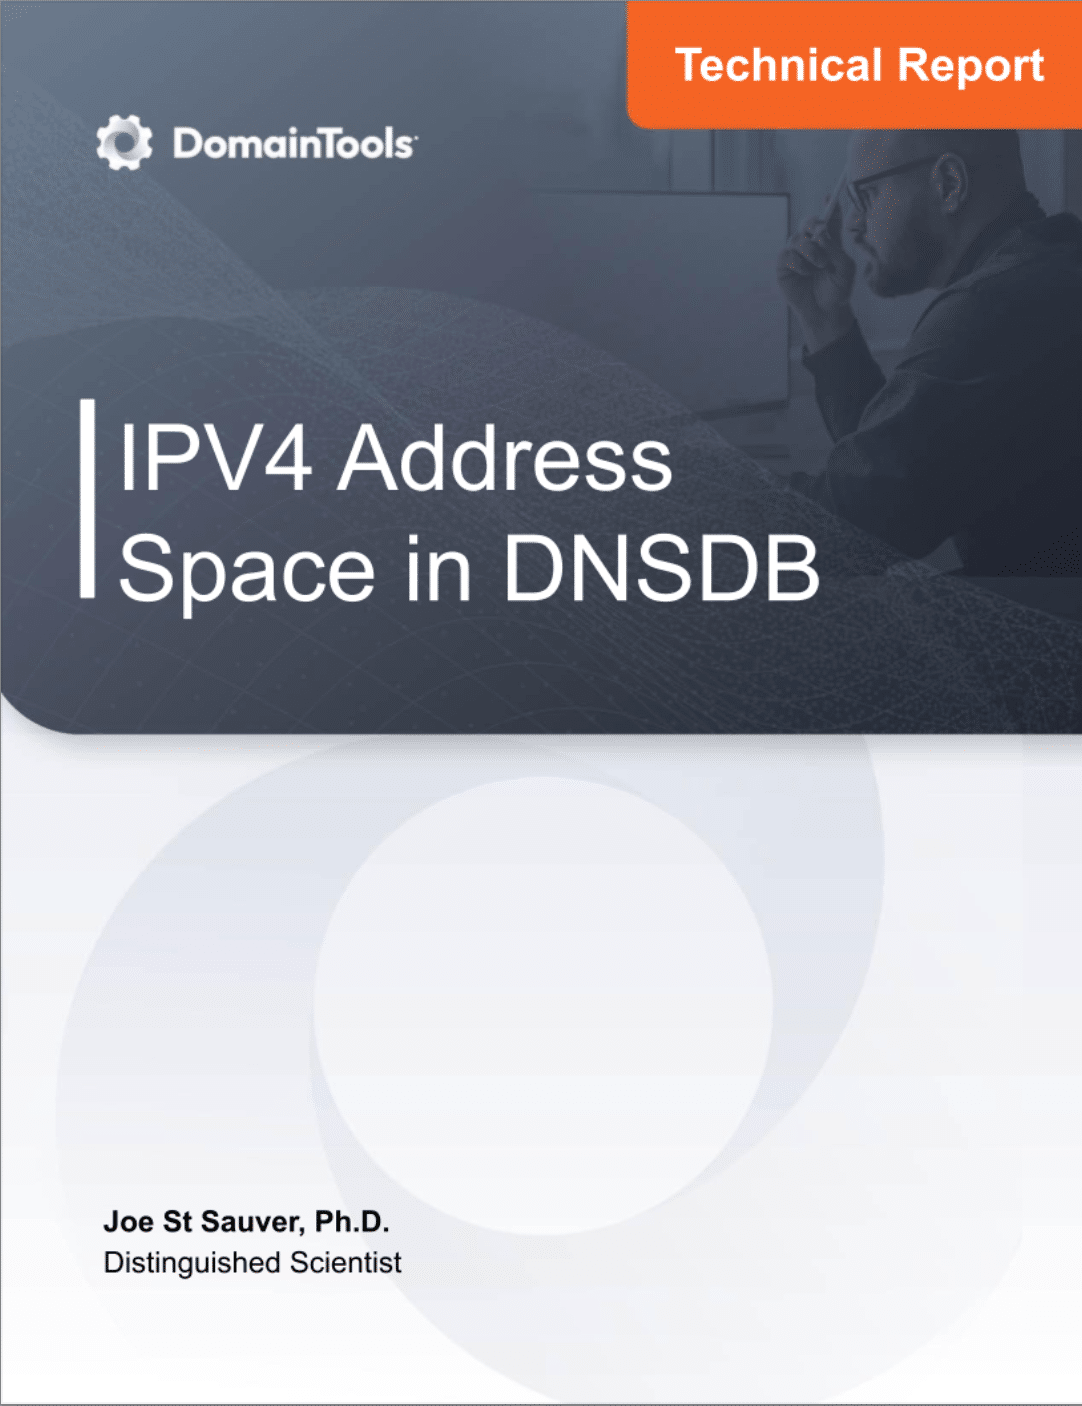 Cover of a technical report titled "IPV4 Address Space in DNSDB" by Joe St Sauver, Ph.D., featuring an image of a man in thought, using a laptop in a dim